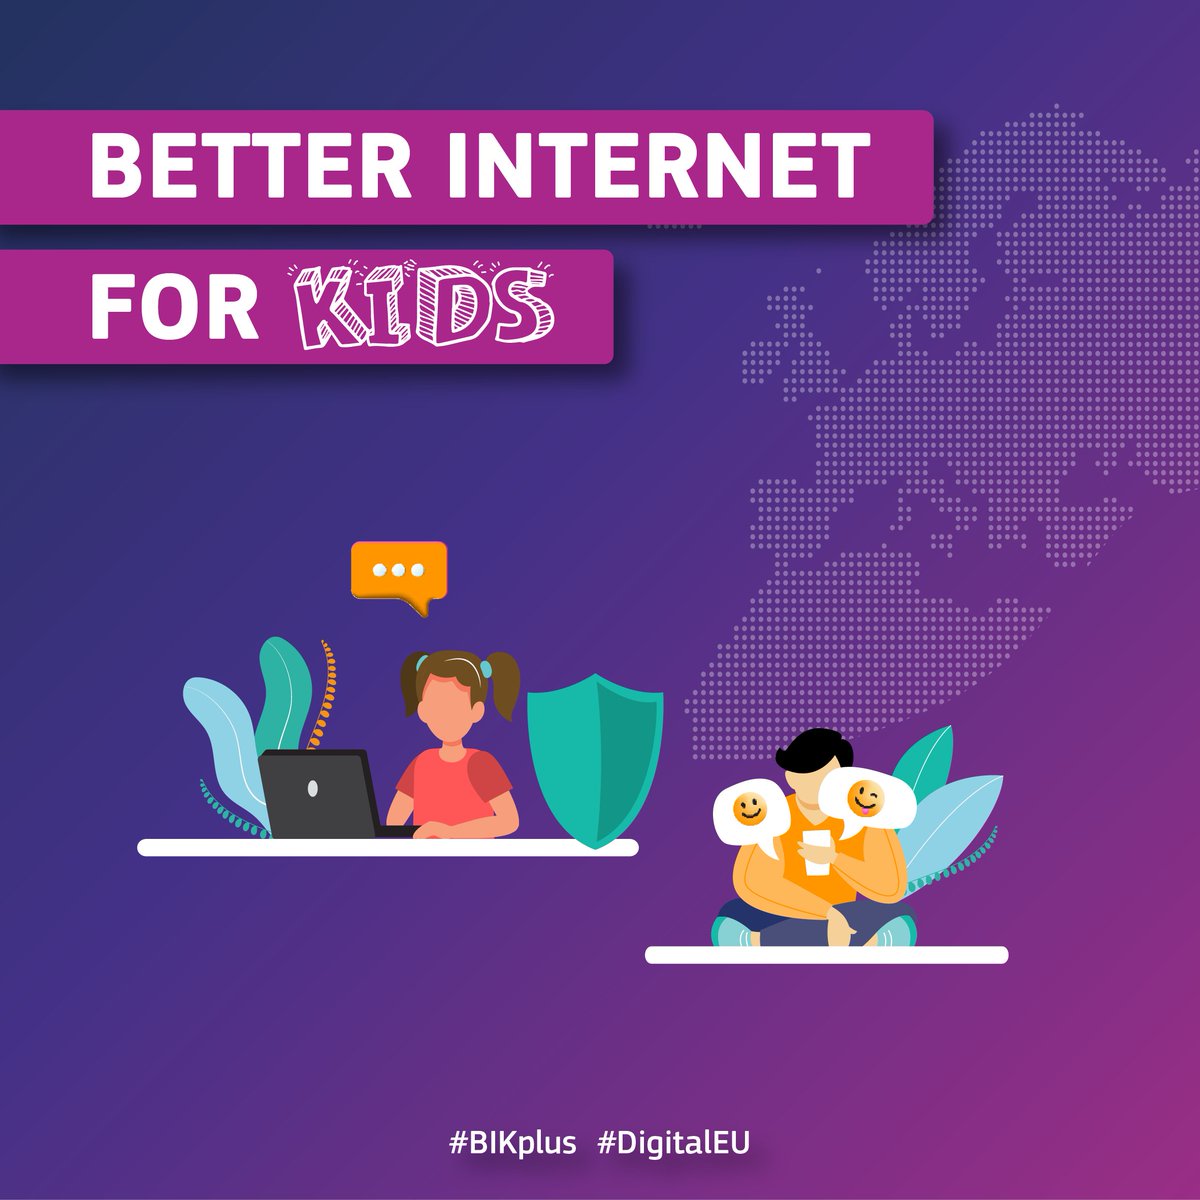 📢The new #EU strategy for a Better Internet for Kids is out! 

💻#BIKplus aims to ensure that #children and #youth have safe digital experiences, are digitally empowered and have a say in digital environment. 🛡️

🧐Read more on 👉 europa.eu/!hg7bHd

#DigitalEU